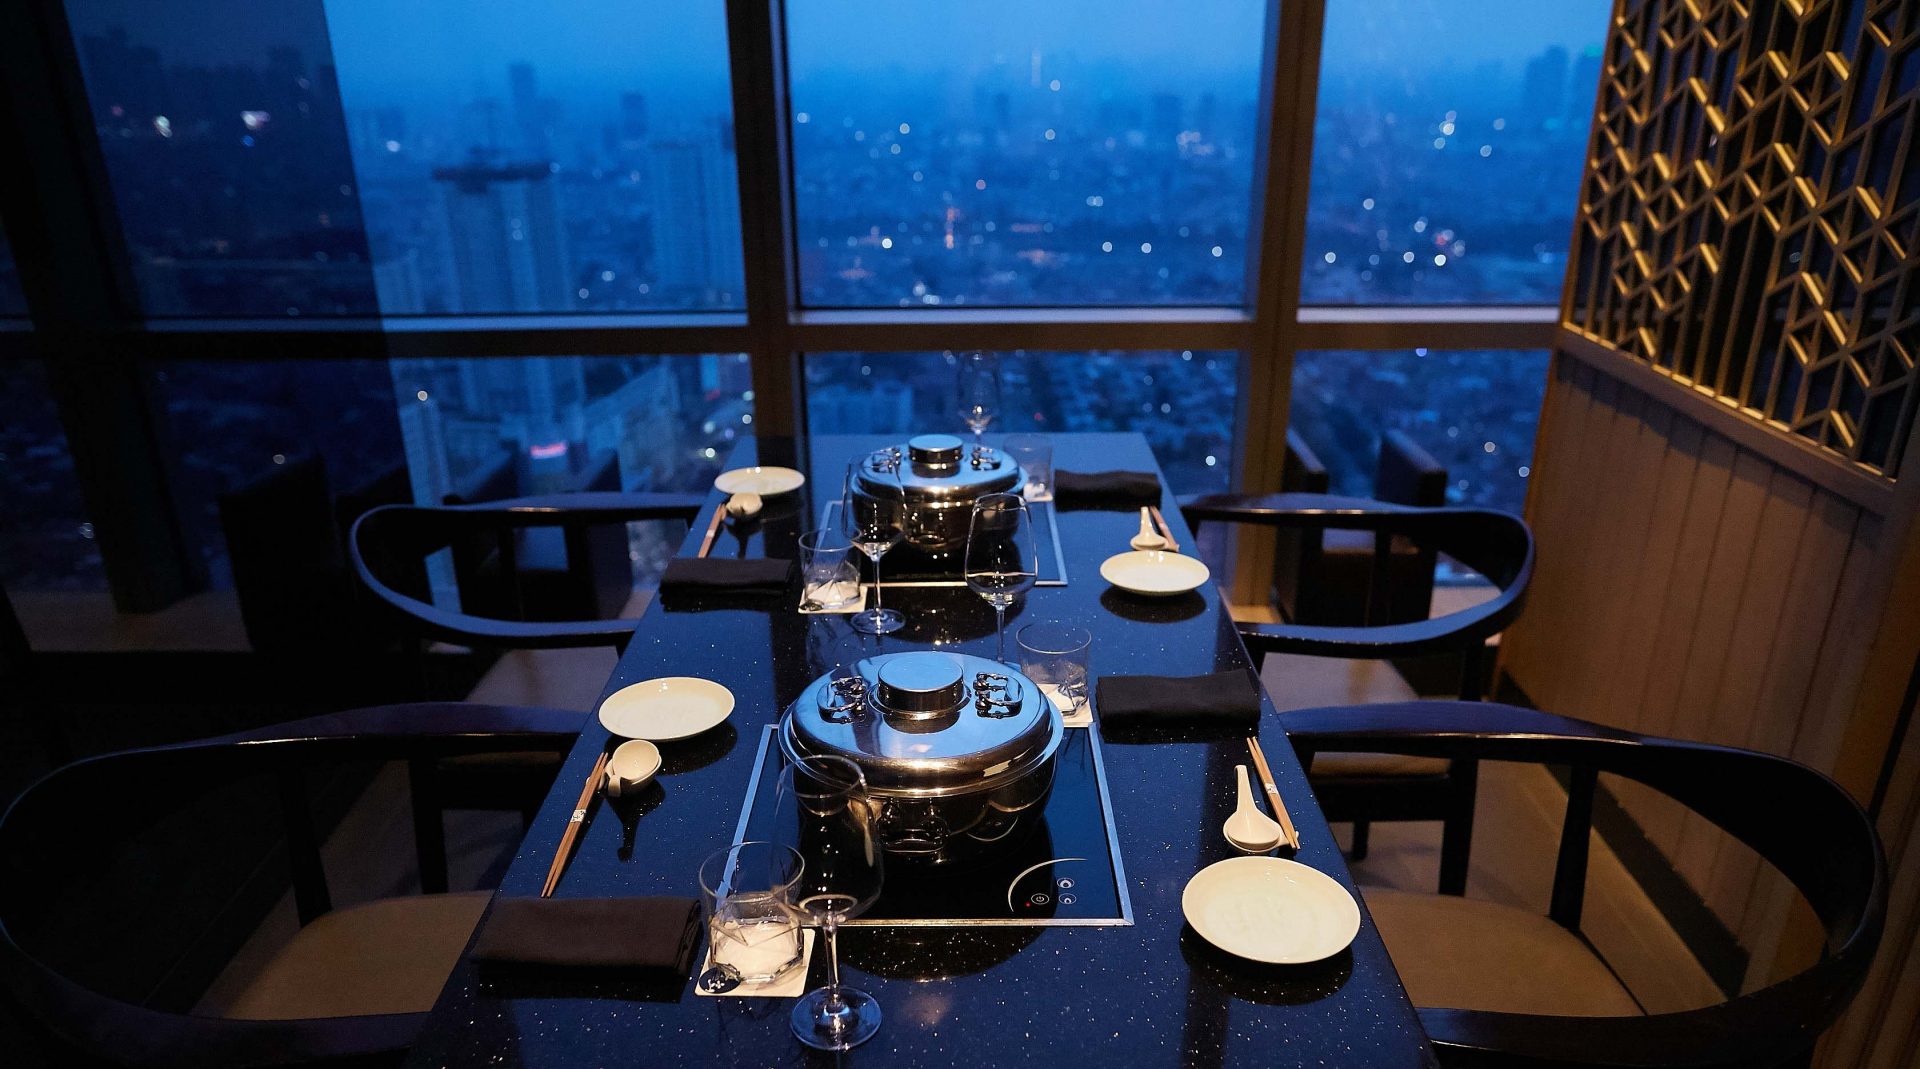 Altitude - The Expert of Dining Experience